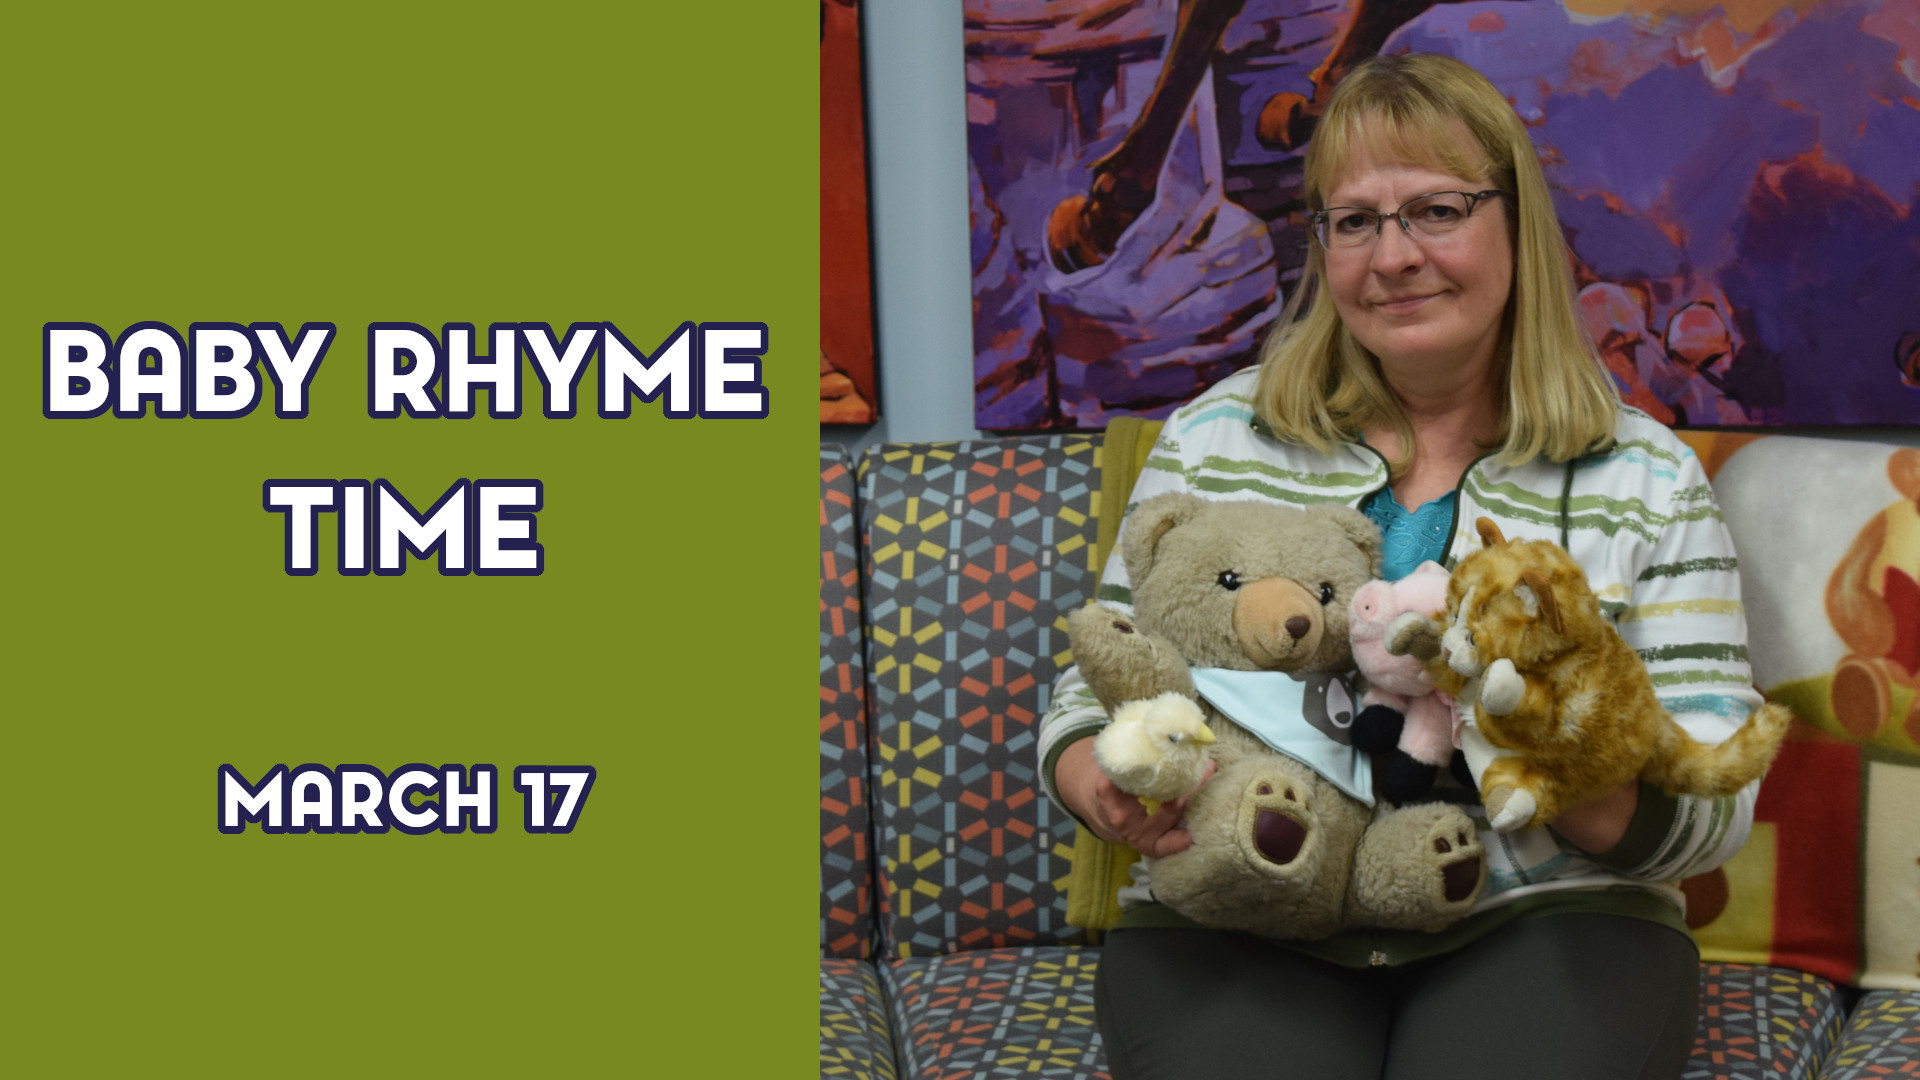 A woman holds stuffed animals next to the text "Baby Rhyme Time March 17"